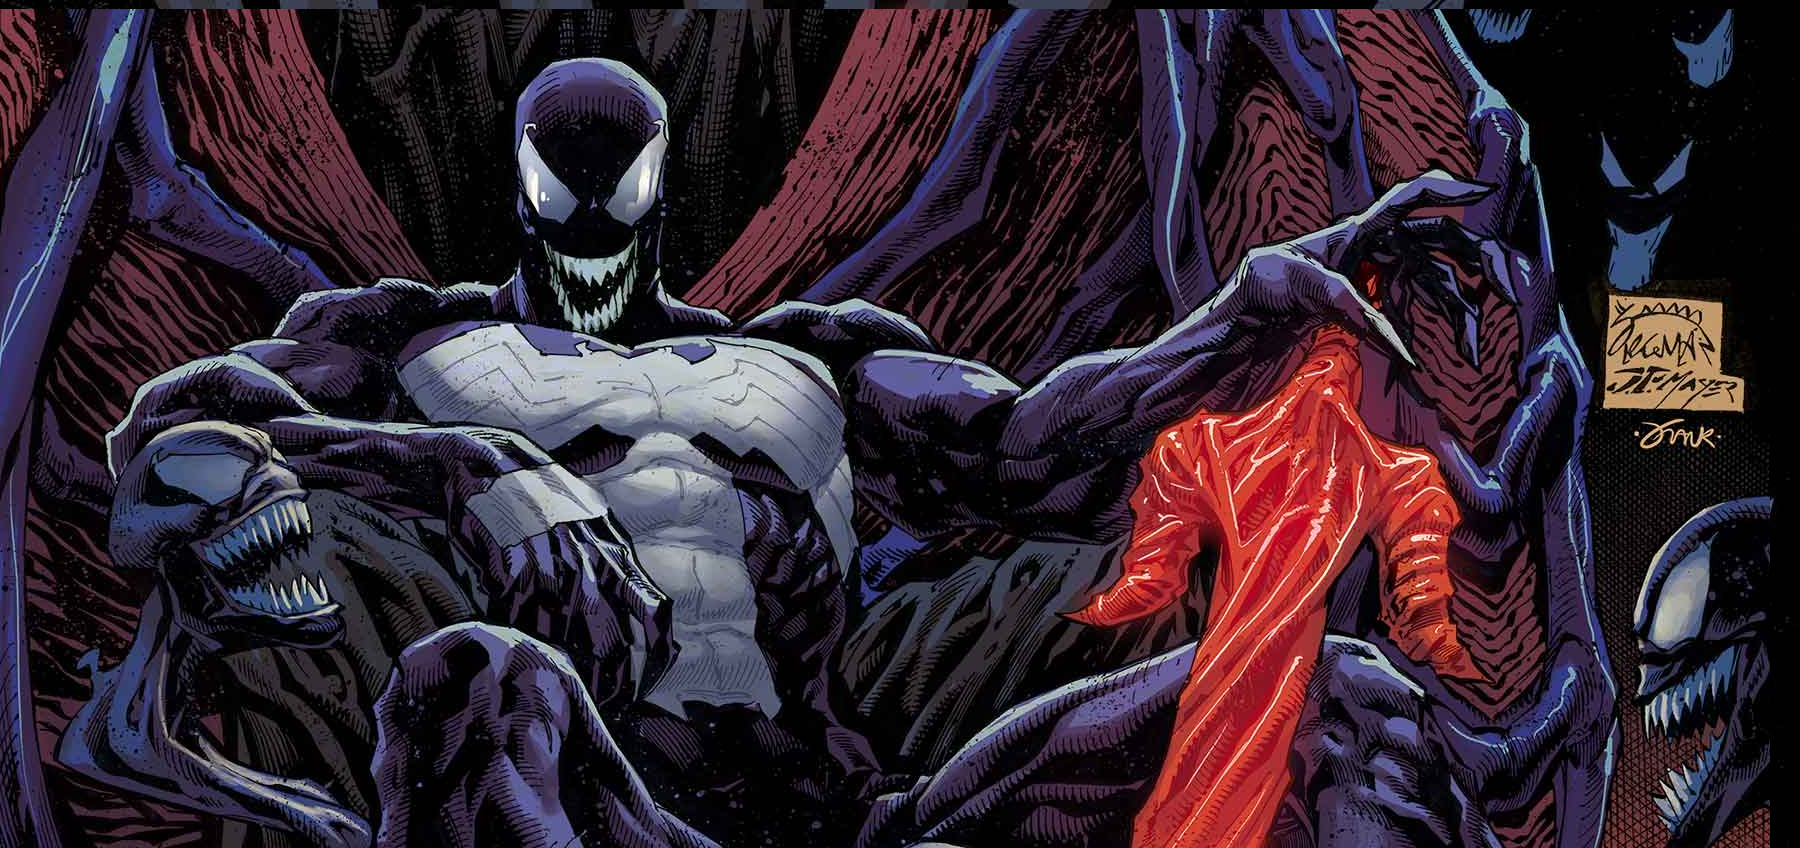 Cropped image of Venom sitting on a throne